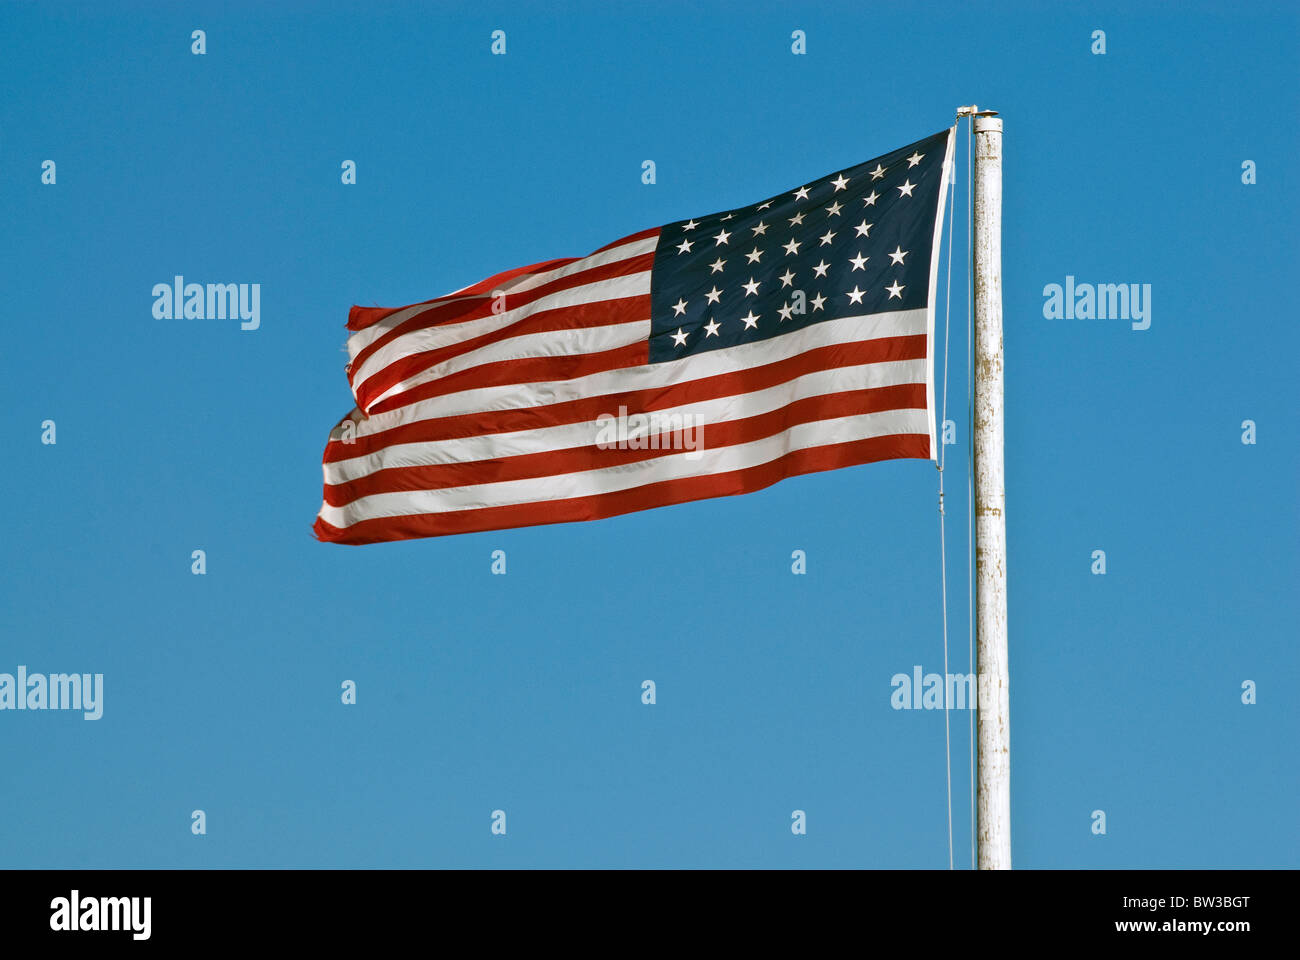 US flag with 33 stars from period 1859-1861 flying over Fort Lancaster State Historic Site, Texas, USA Stock Photo